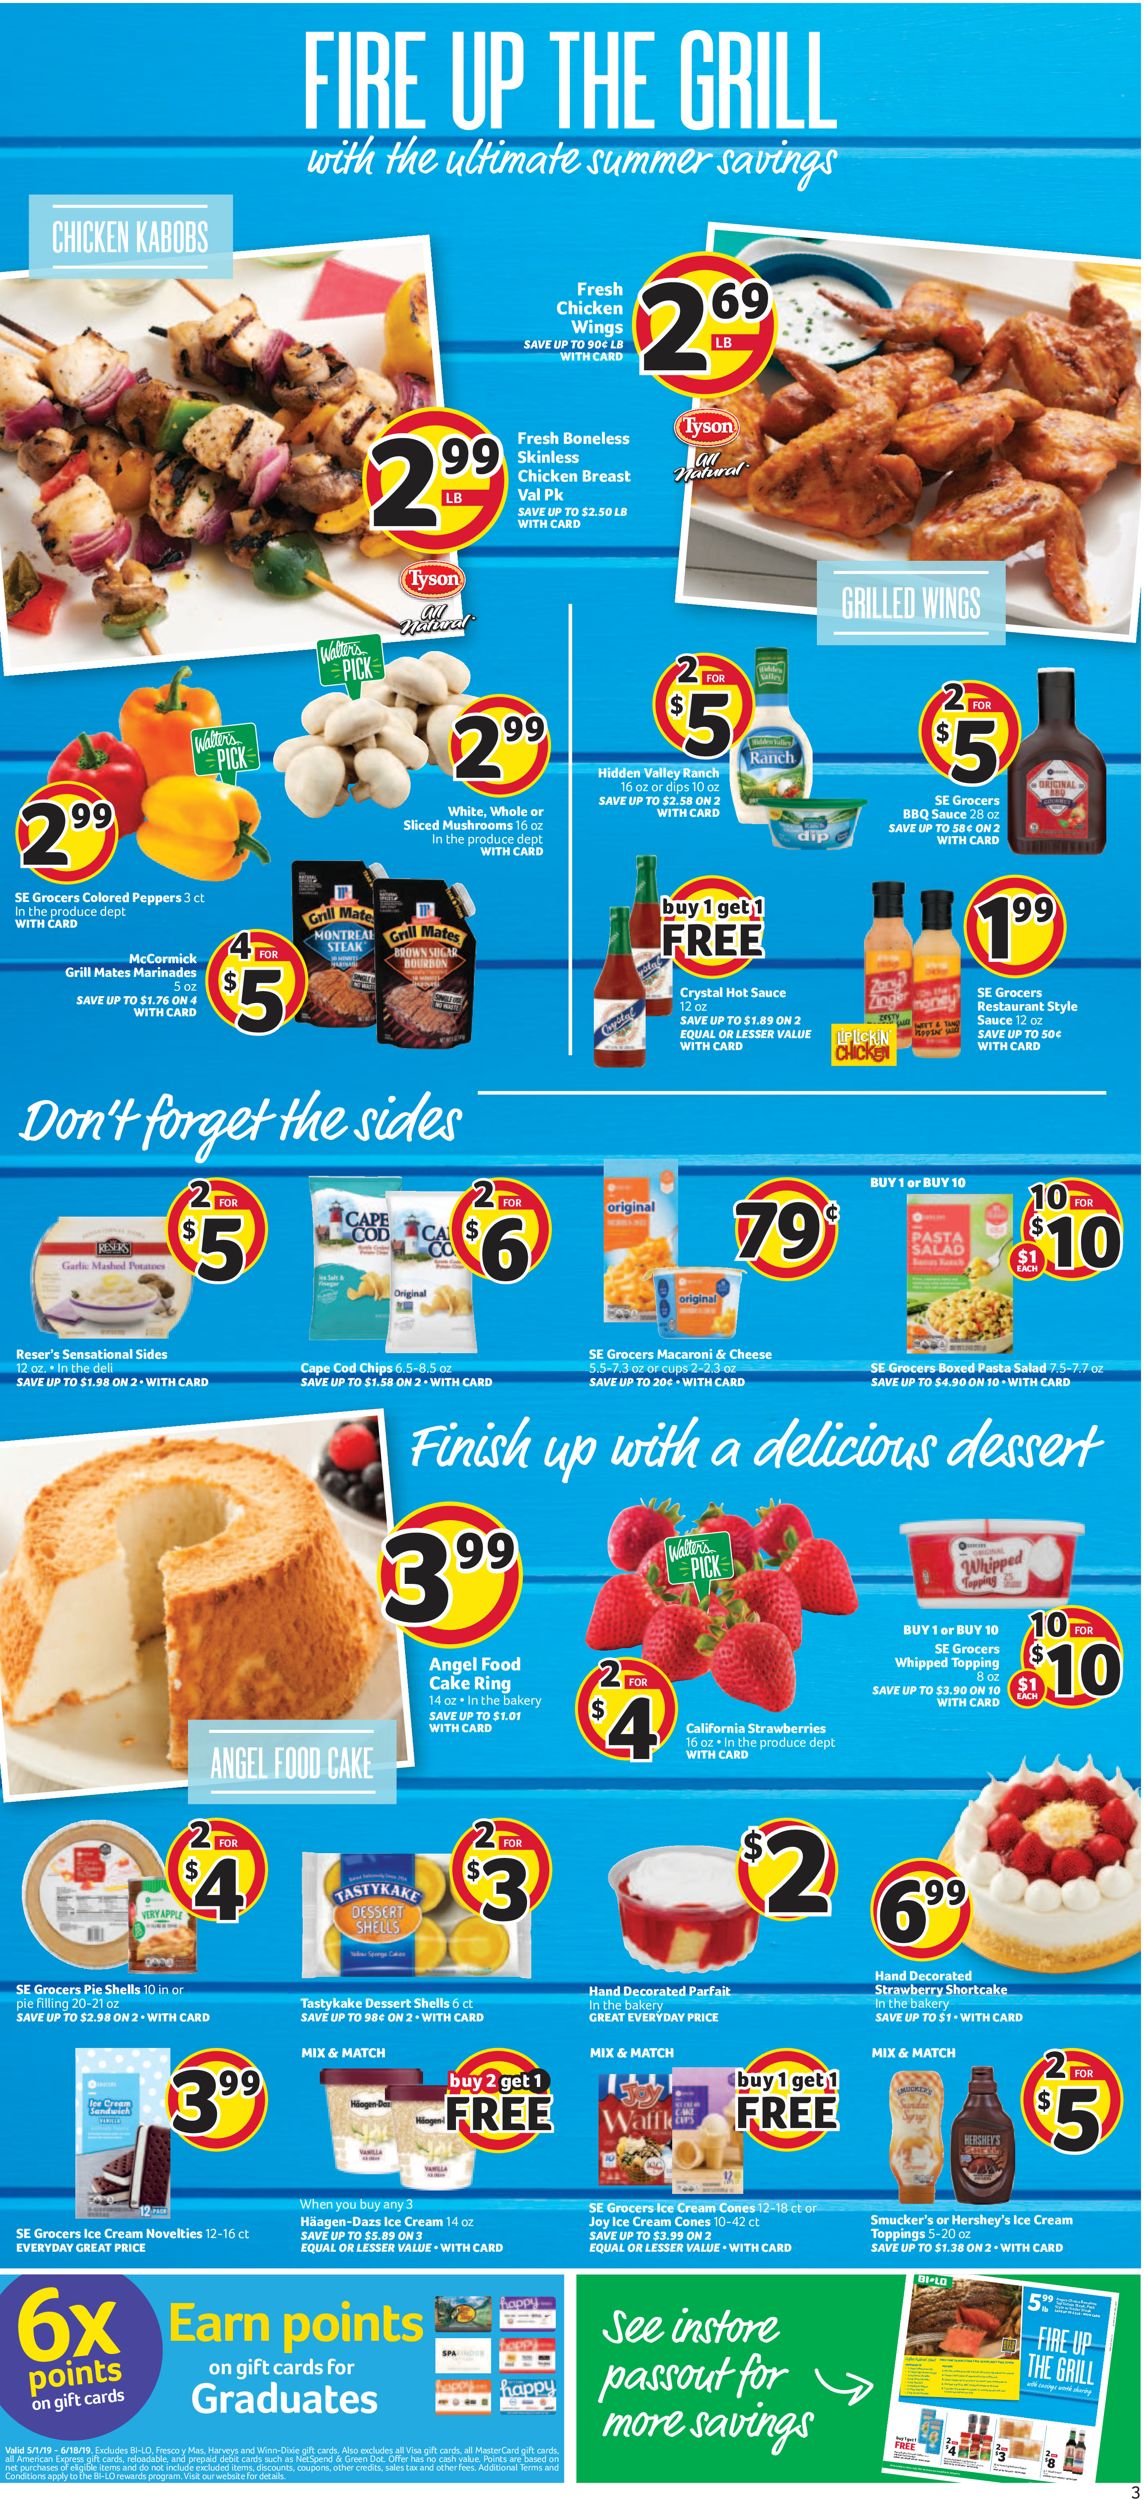 Catalogue BI-LO from 05/29/2019